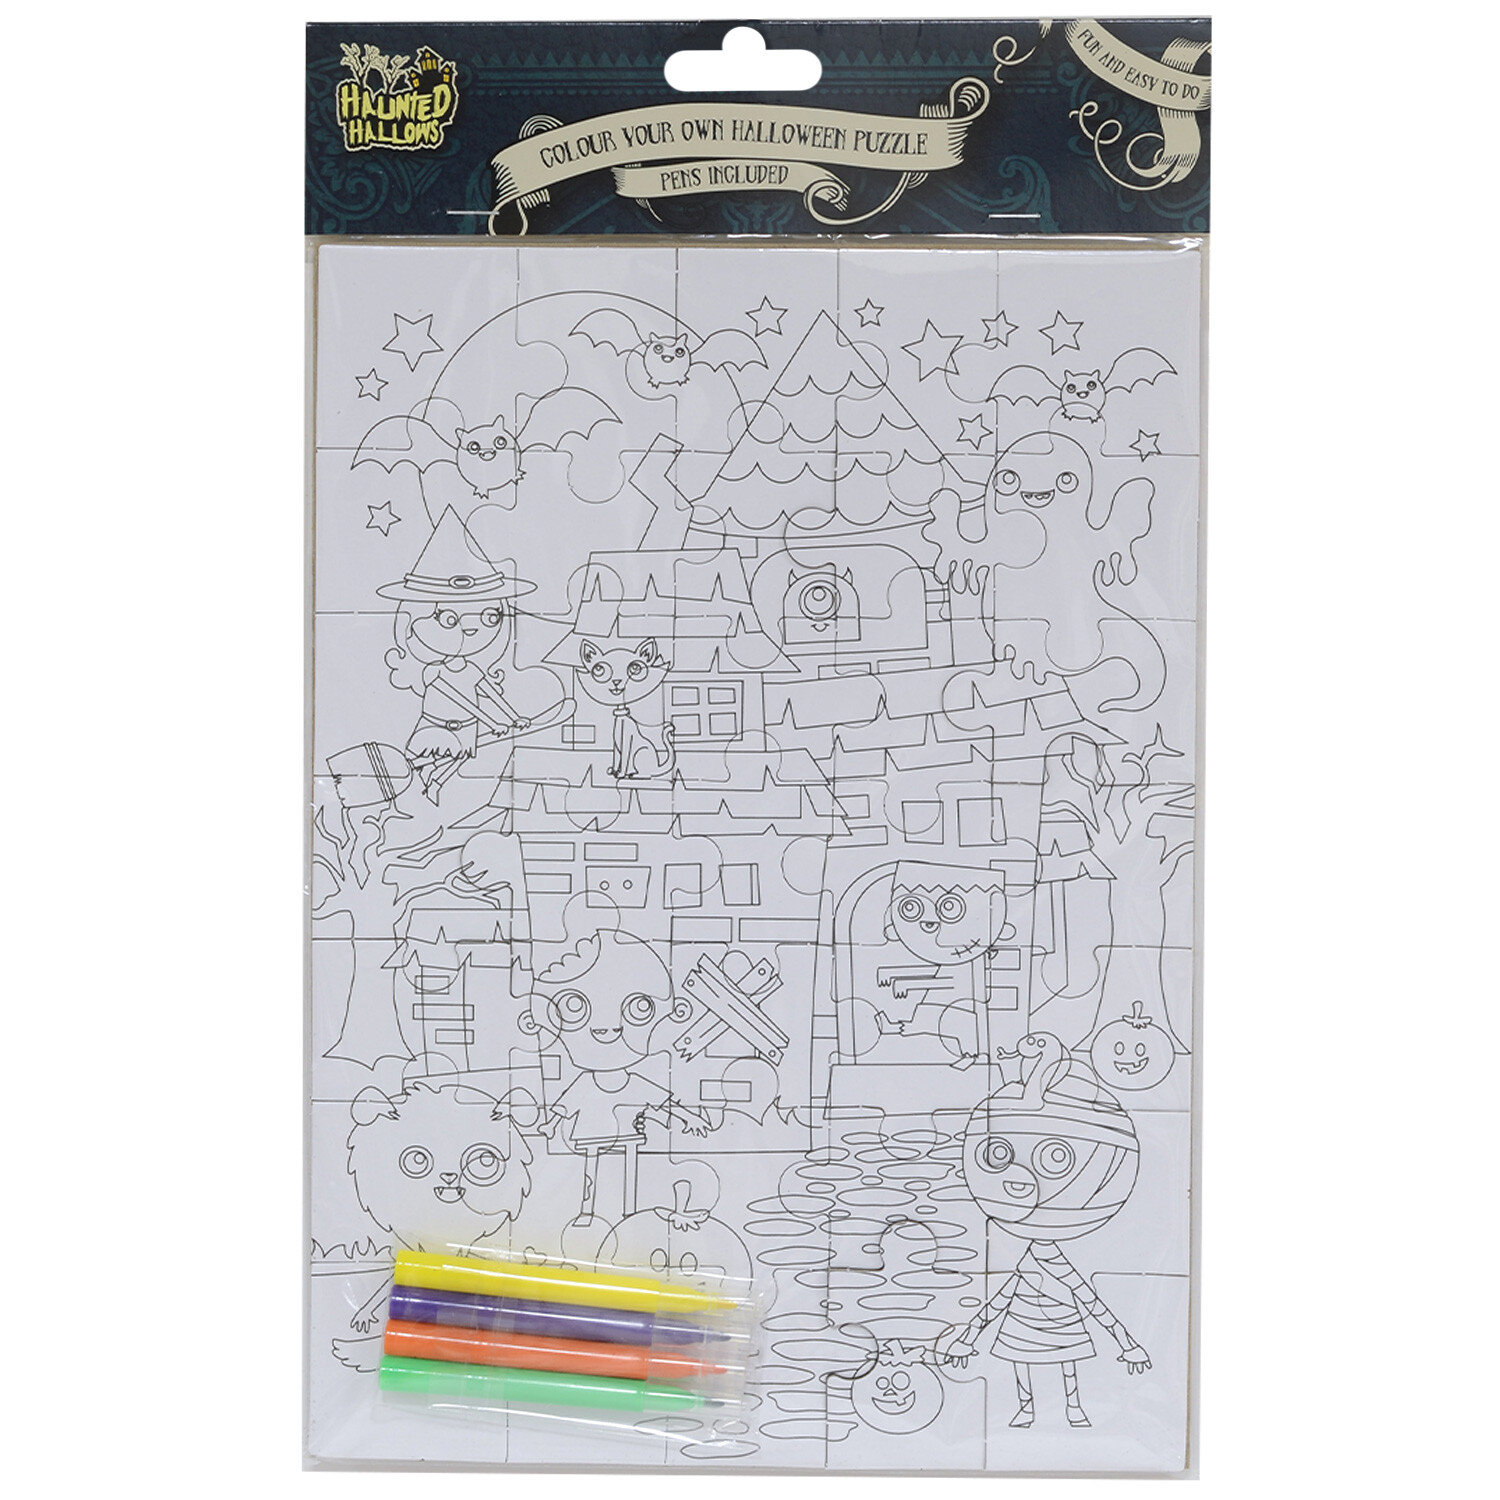 Halloween Puzzle and Pen Set Image